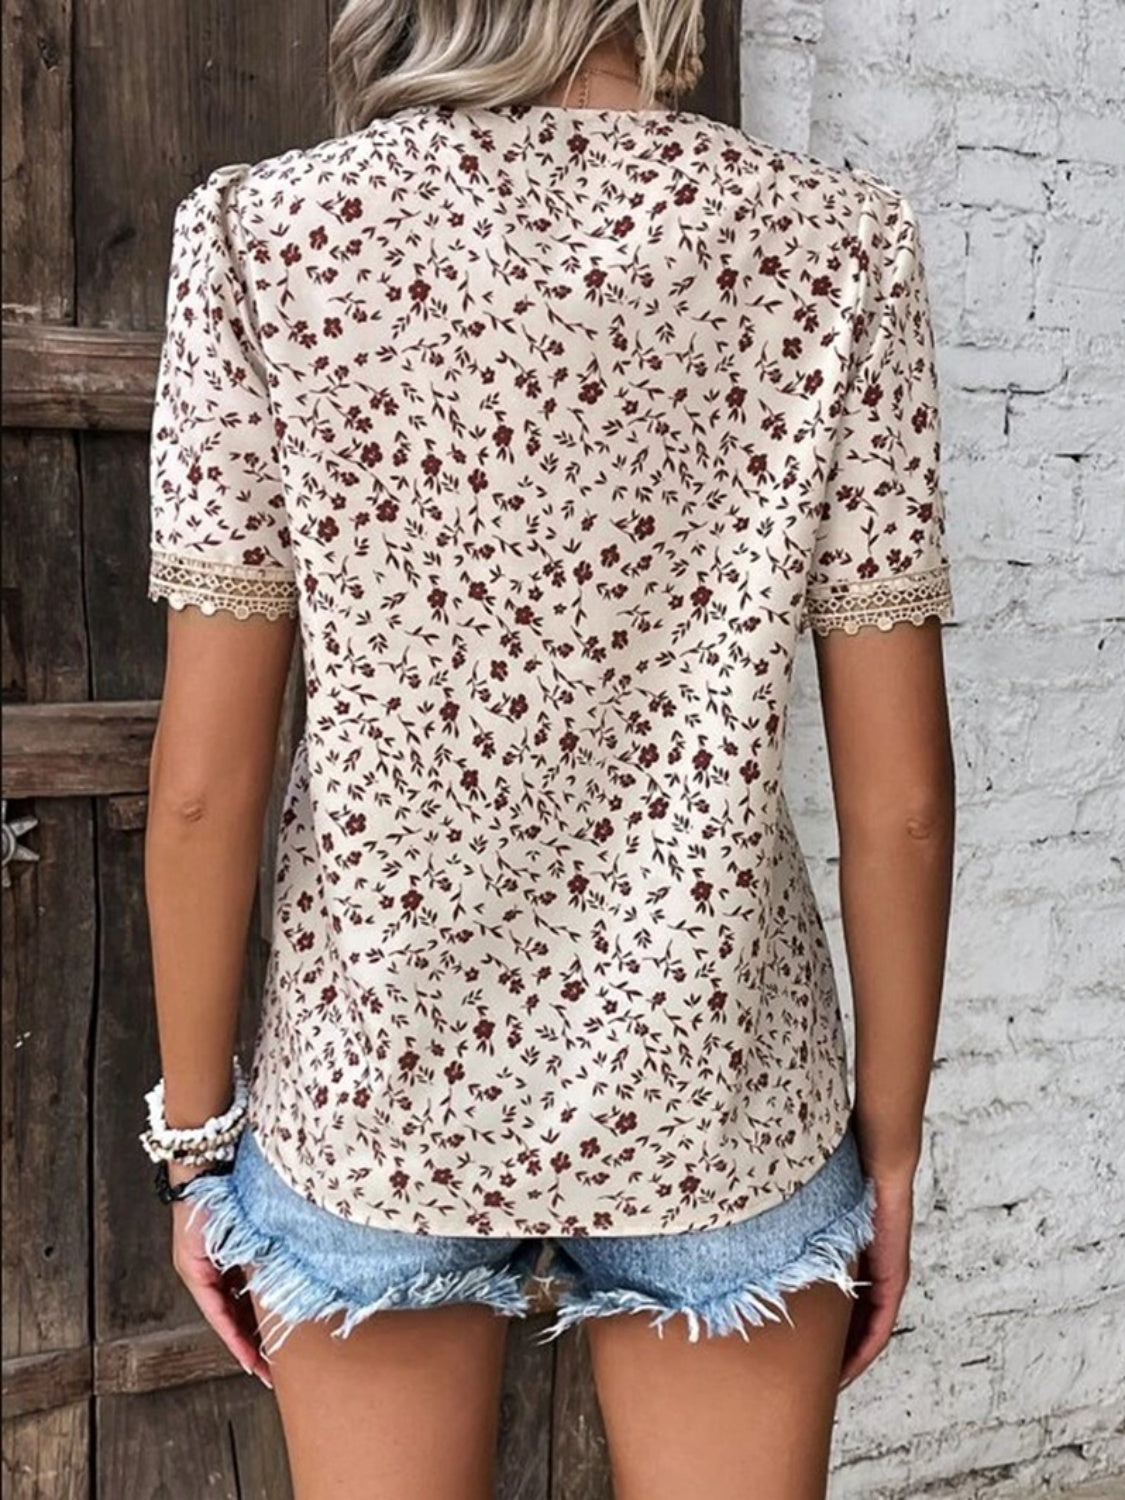 Elevate your style effortlessly with our Full Size Printed V-Neck Short Sleeve Blouse. Comfortable, elegant, and available in 4 stunning colors.